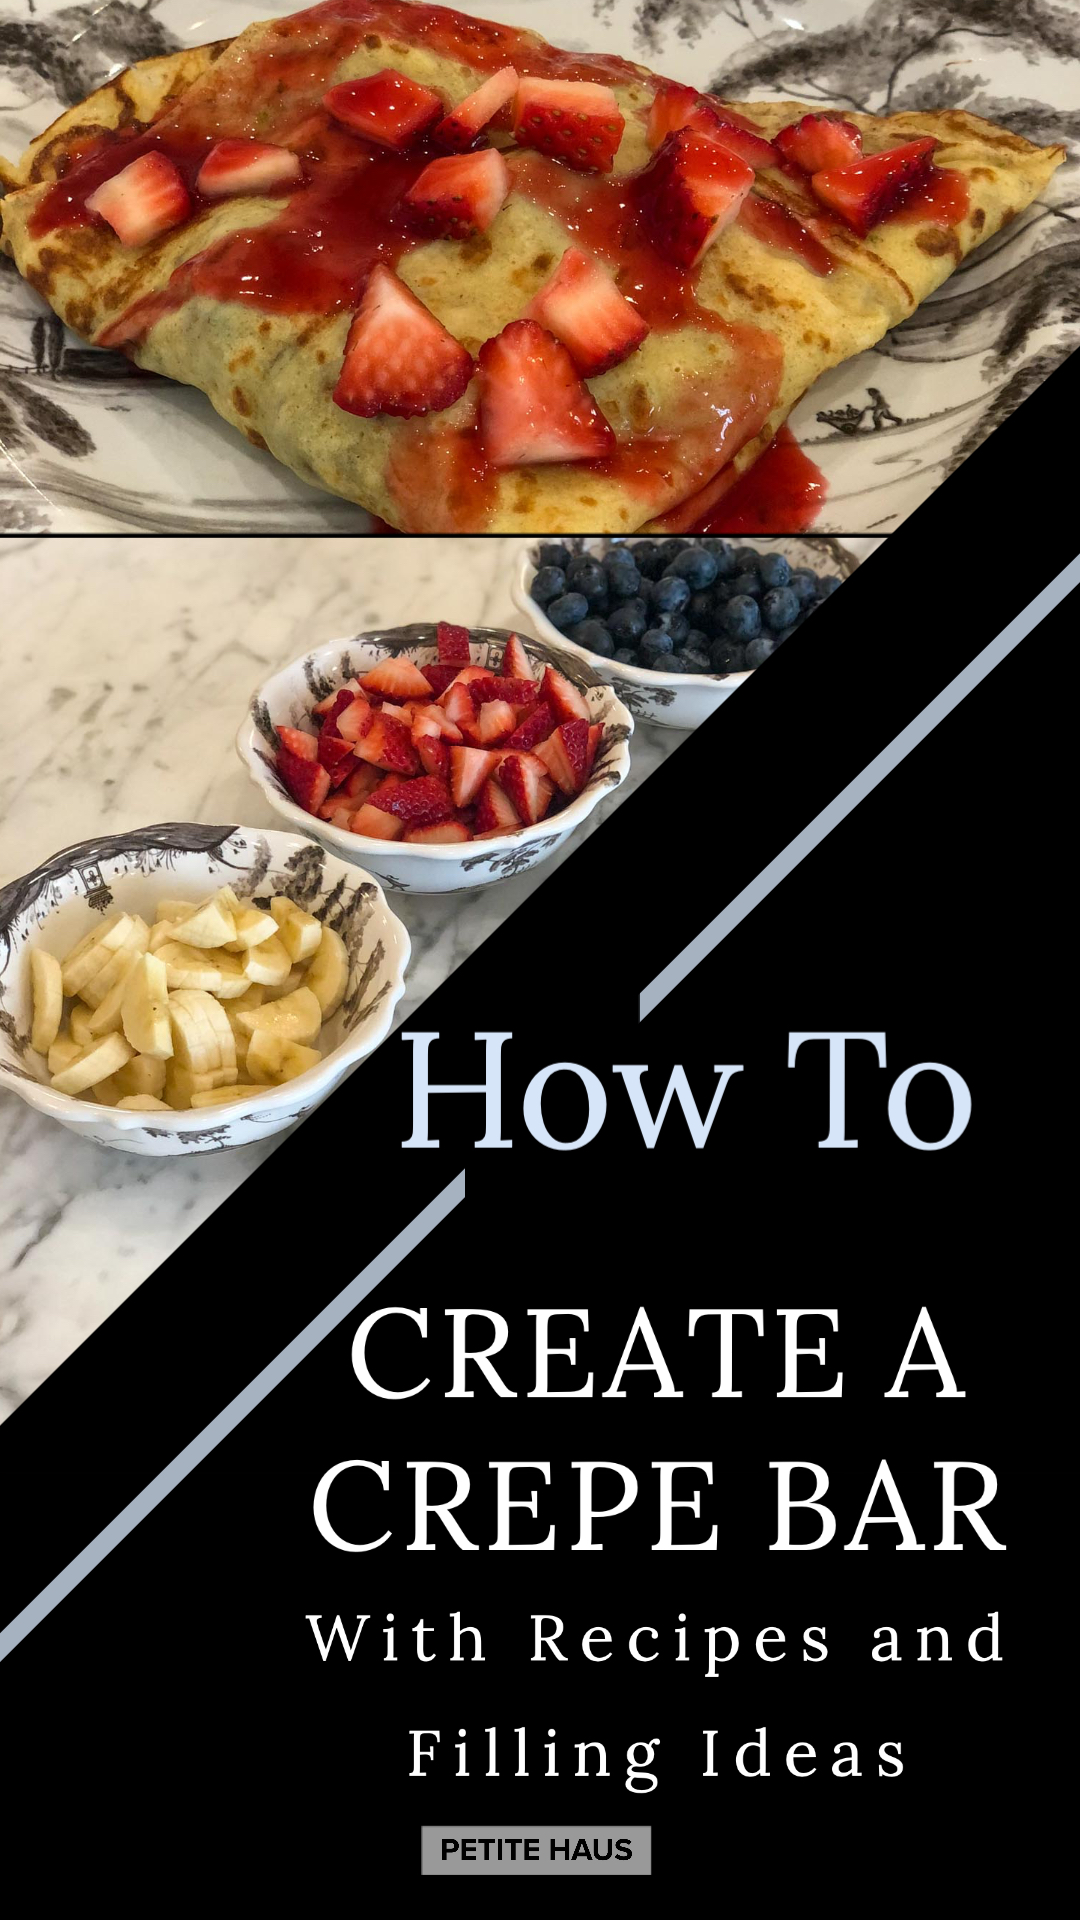 How to create a crepe bar - complete with crepe recipe and crepe filling ideas! 